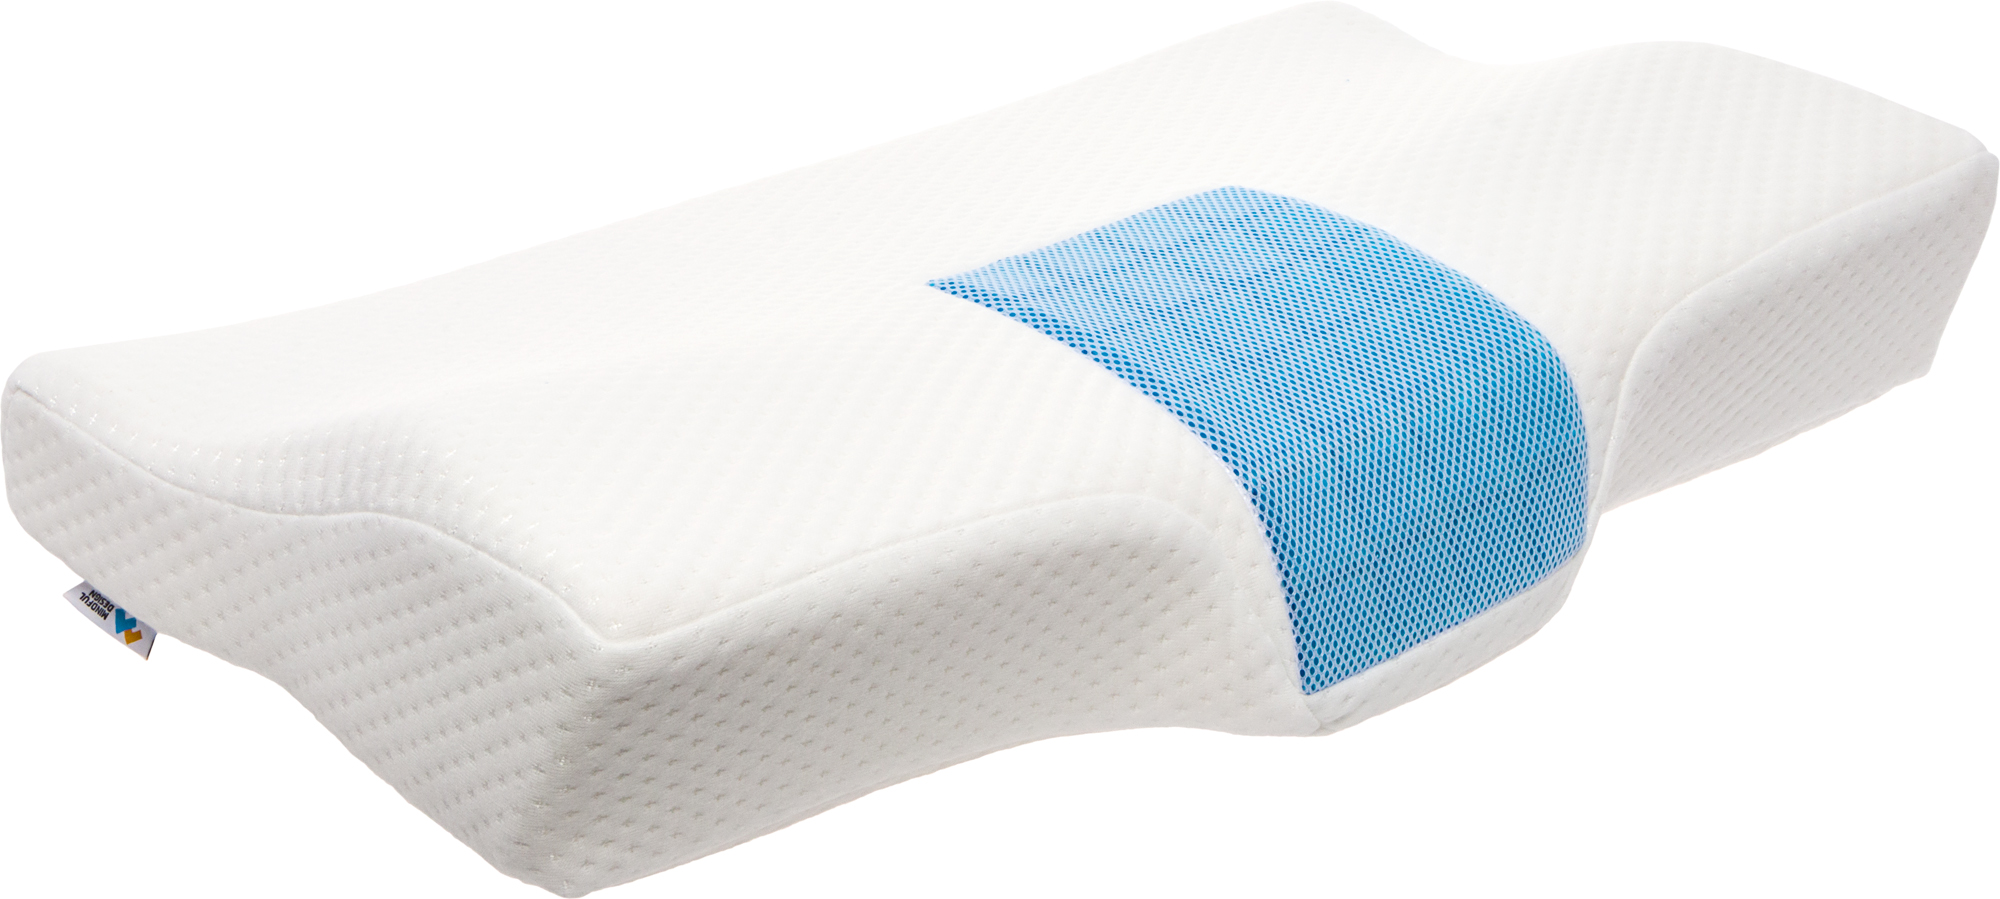 Photo 1 of Mindful Design Cooling Memory Foam Orthopedic Neck and Shoulder Support Pillow